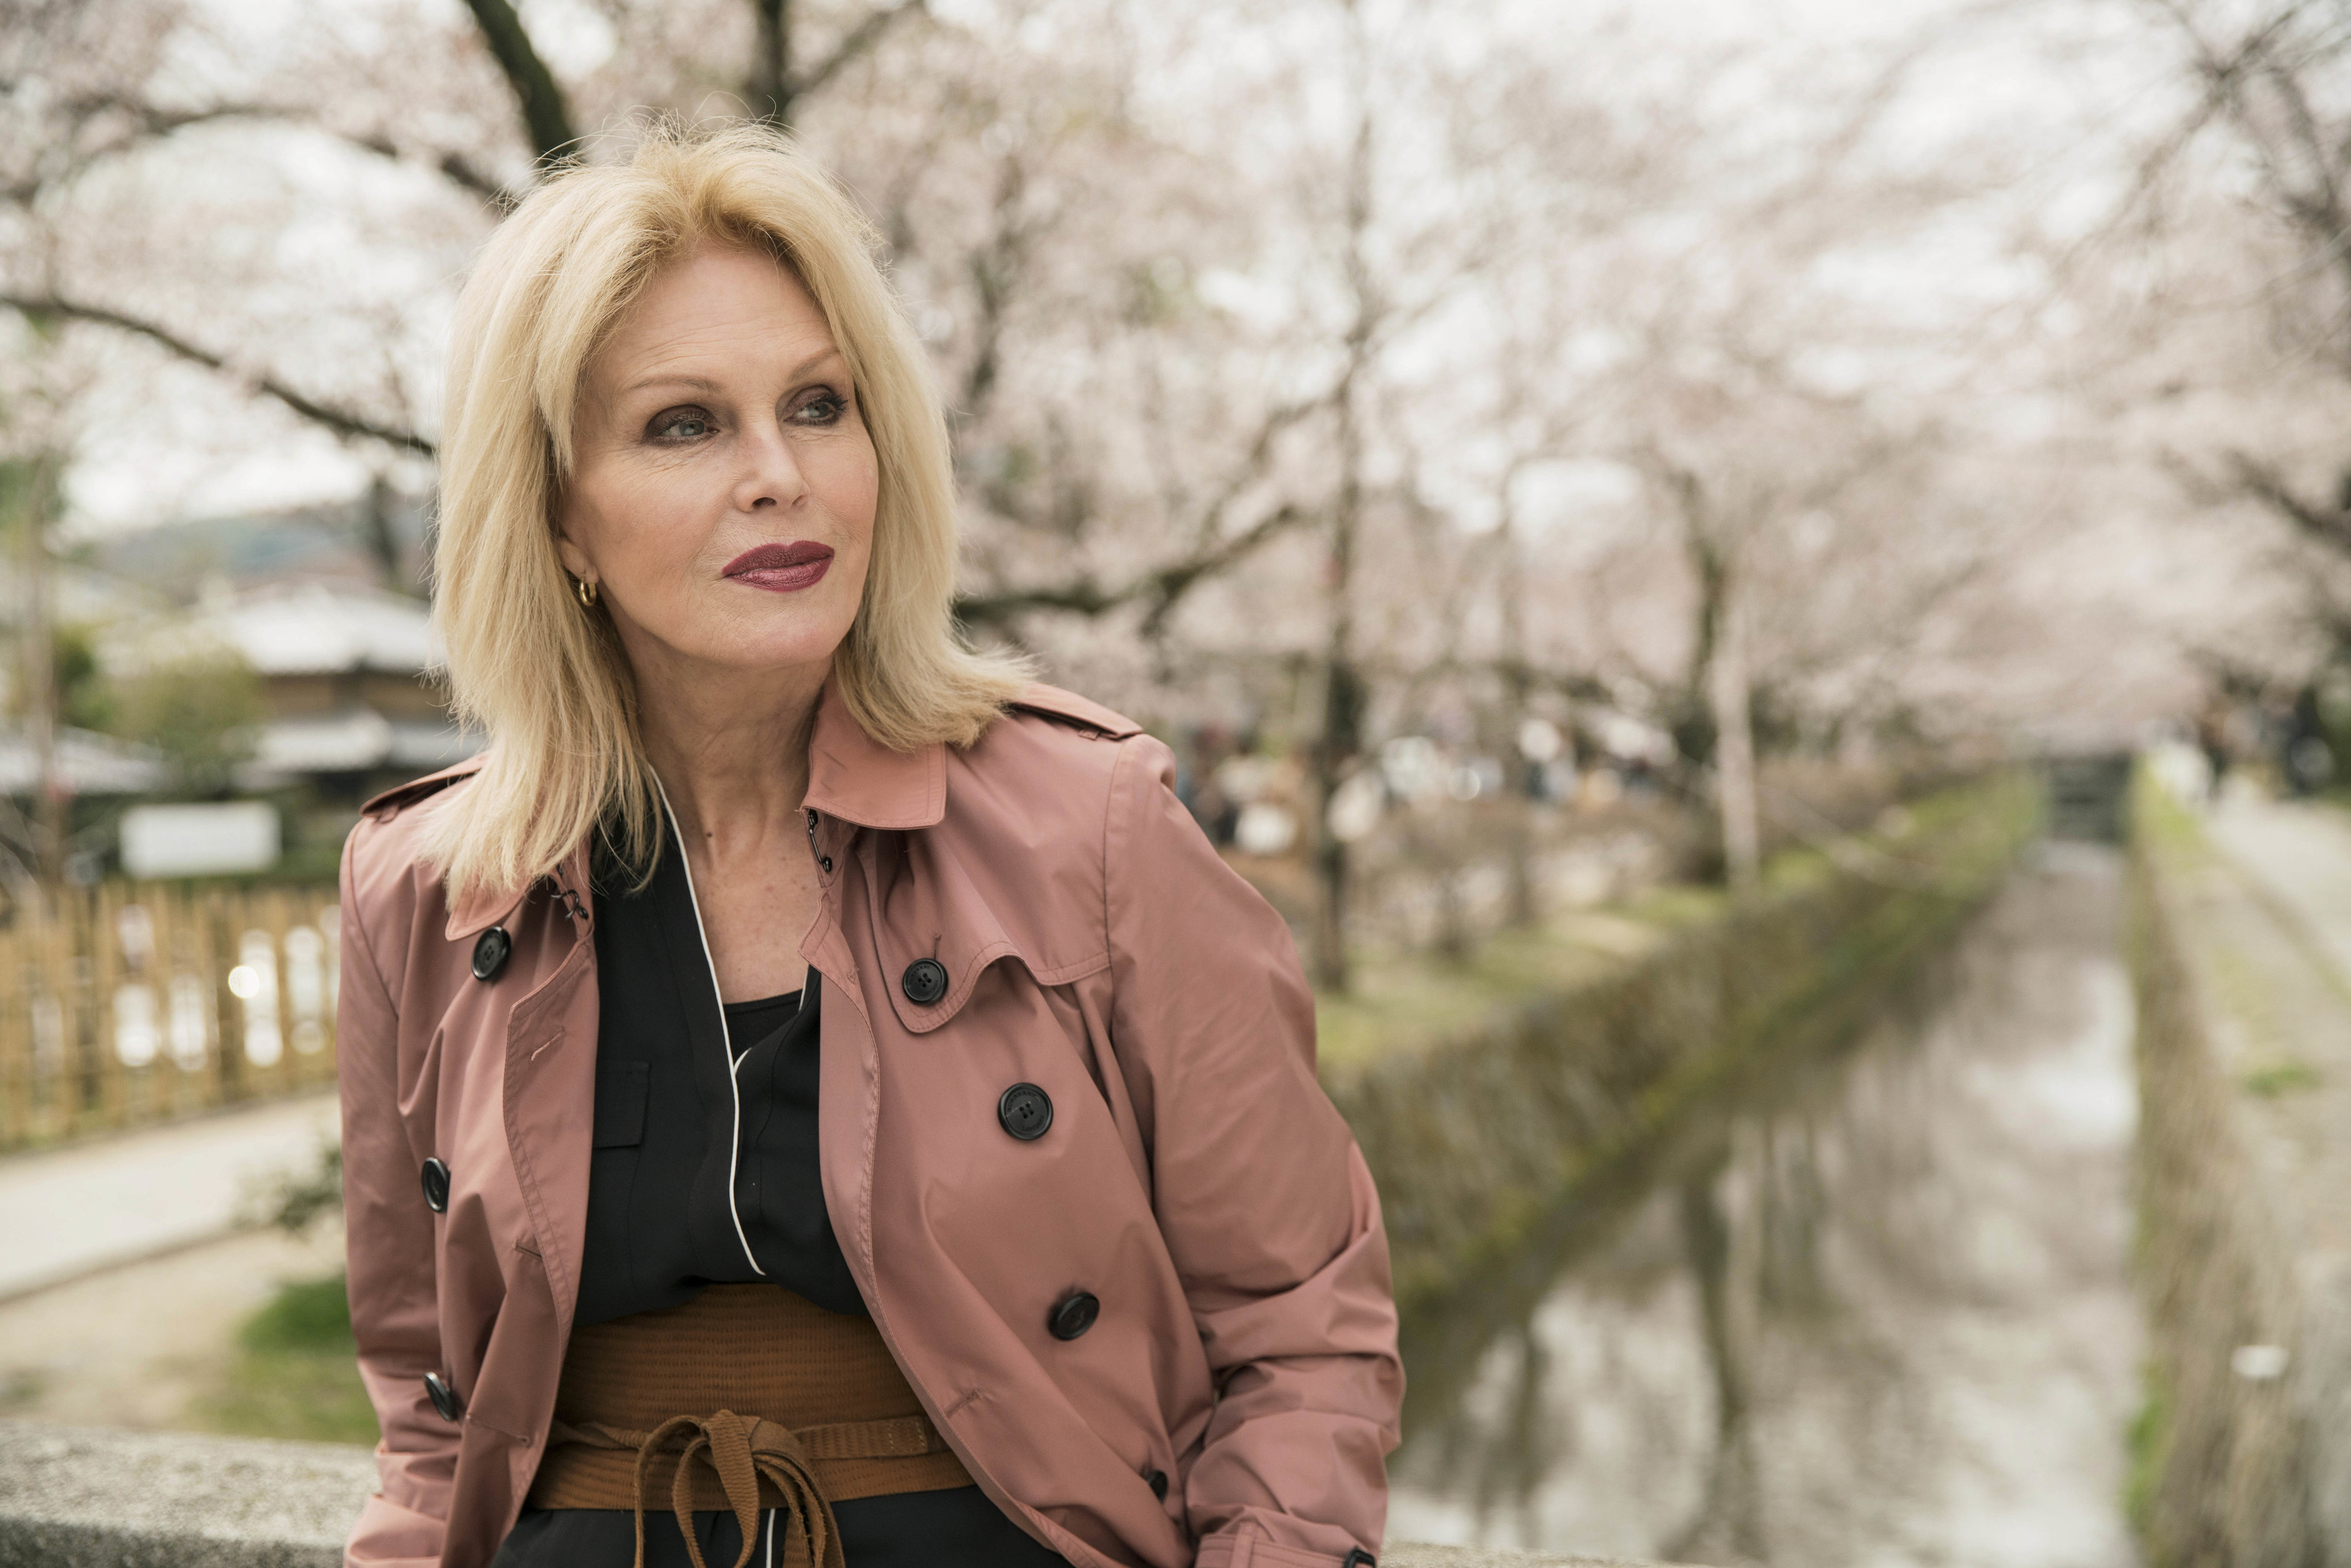 Joanna Lumley on her visit to Japan (Burning Bright Production / ITV)